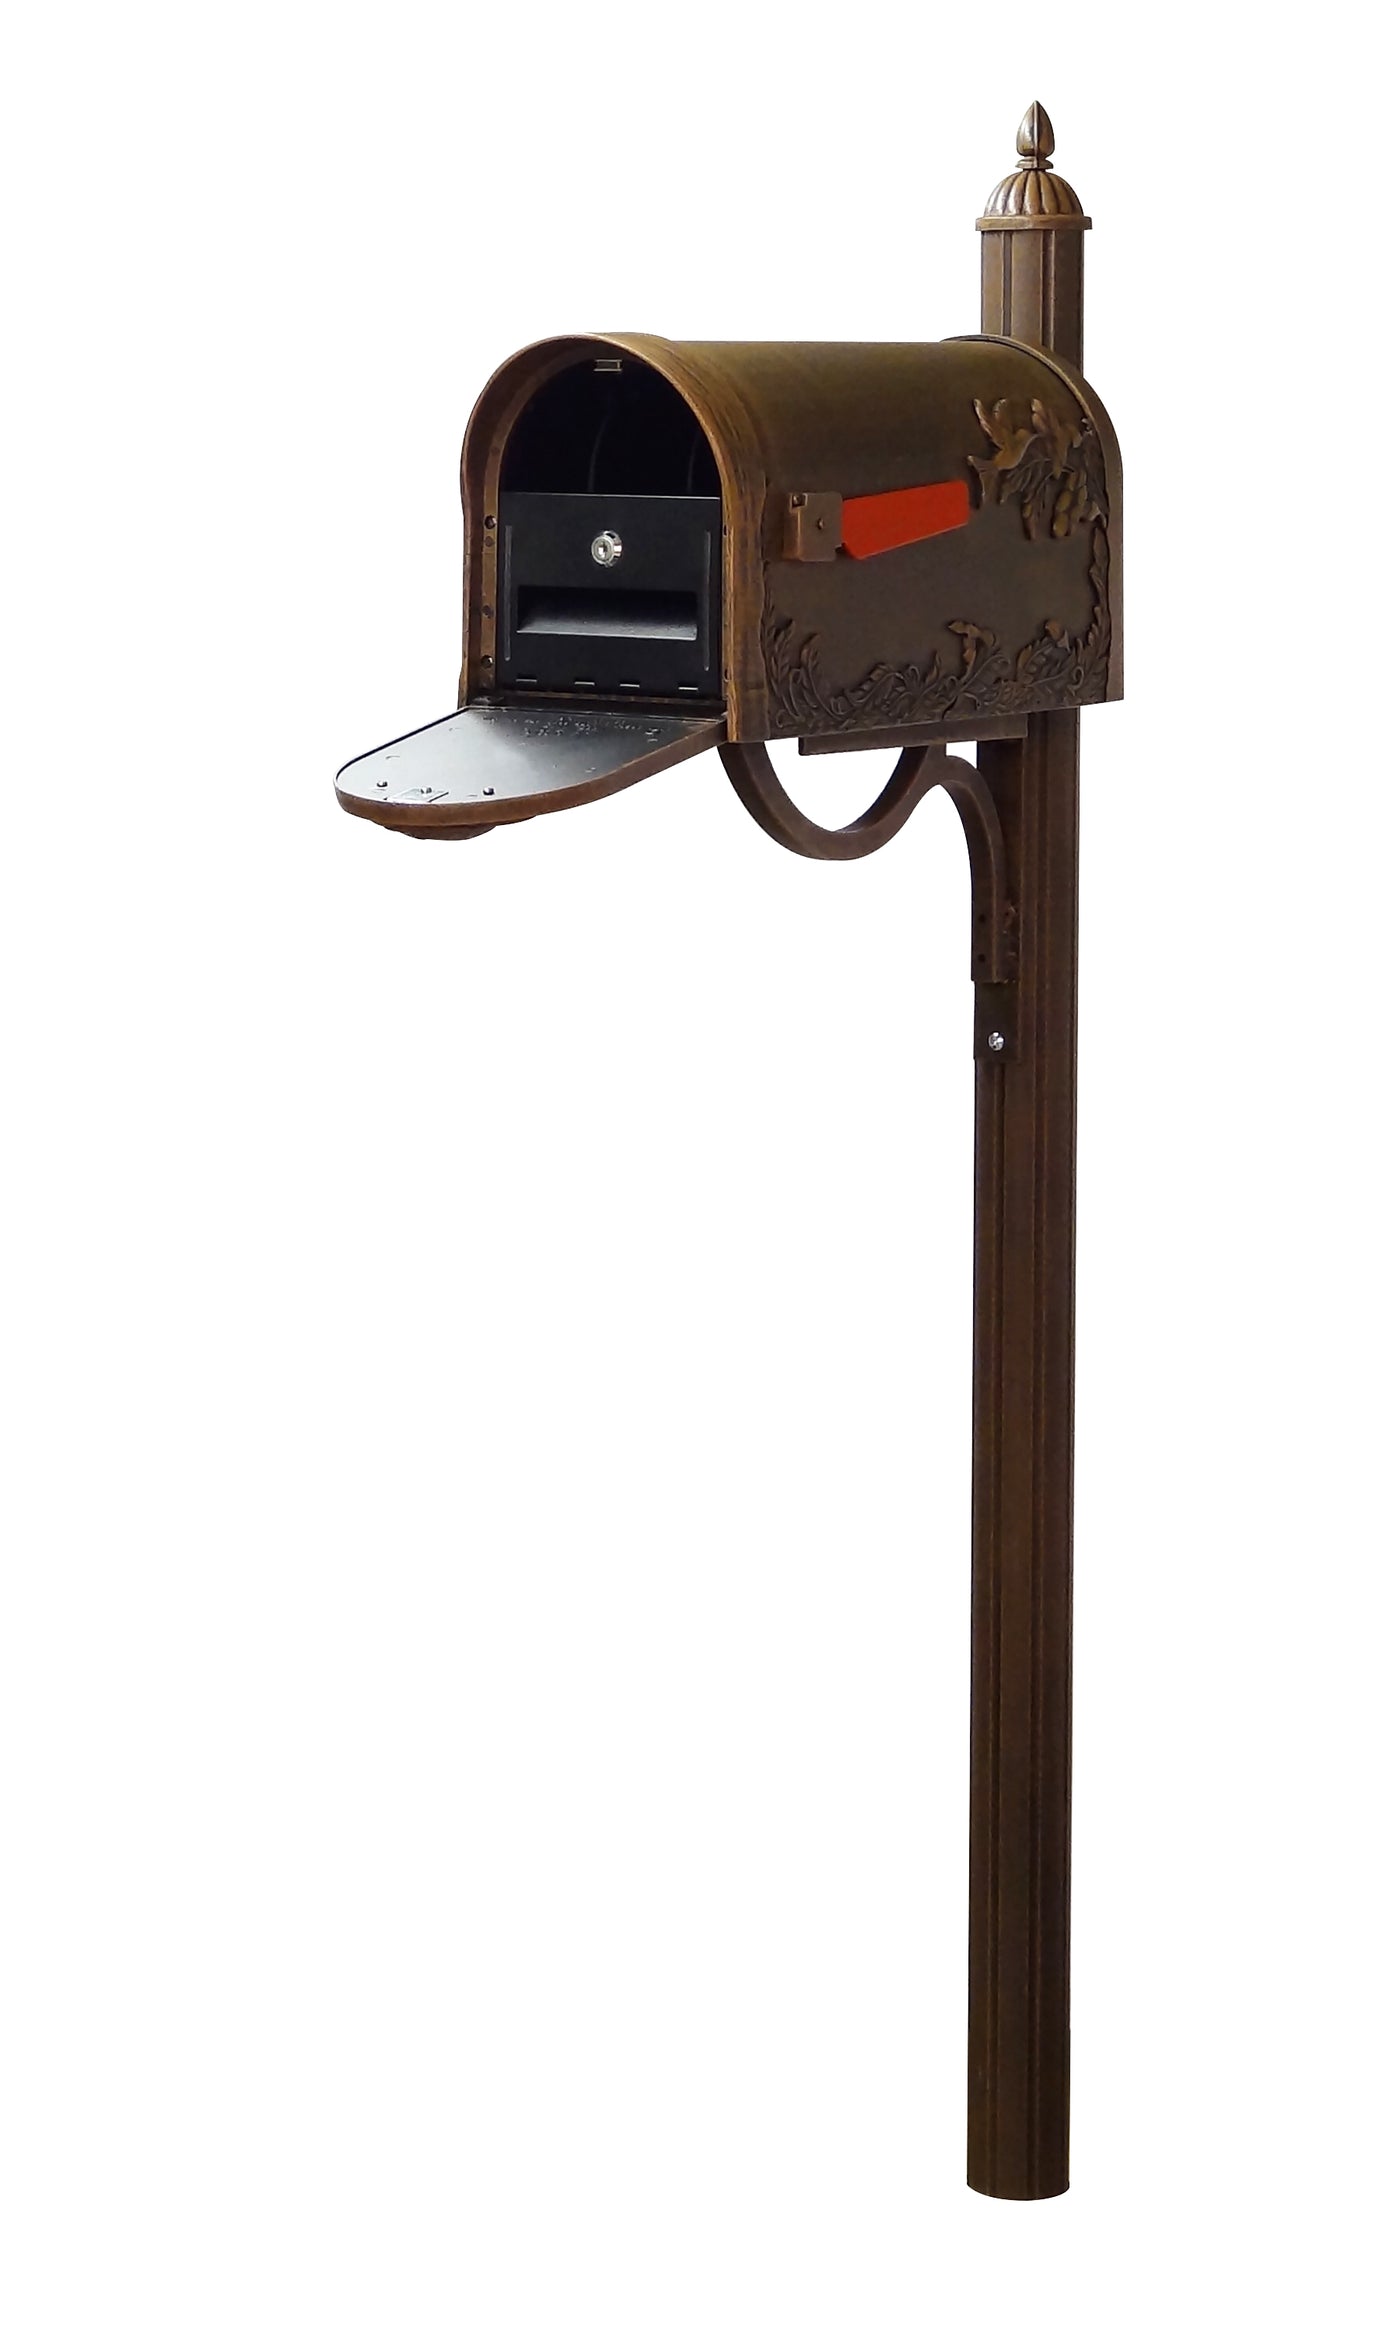 Hummingbird Curbside Mailbox with Locking Insert and Richland Mailbox Post